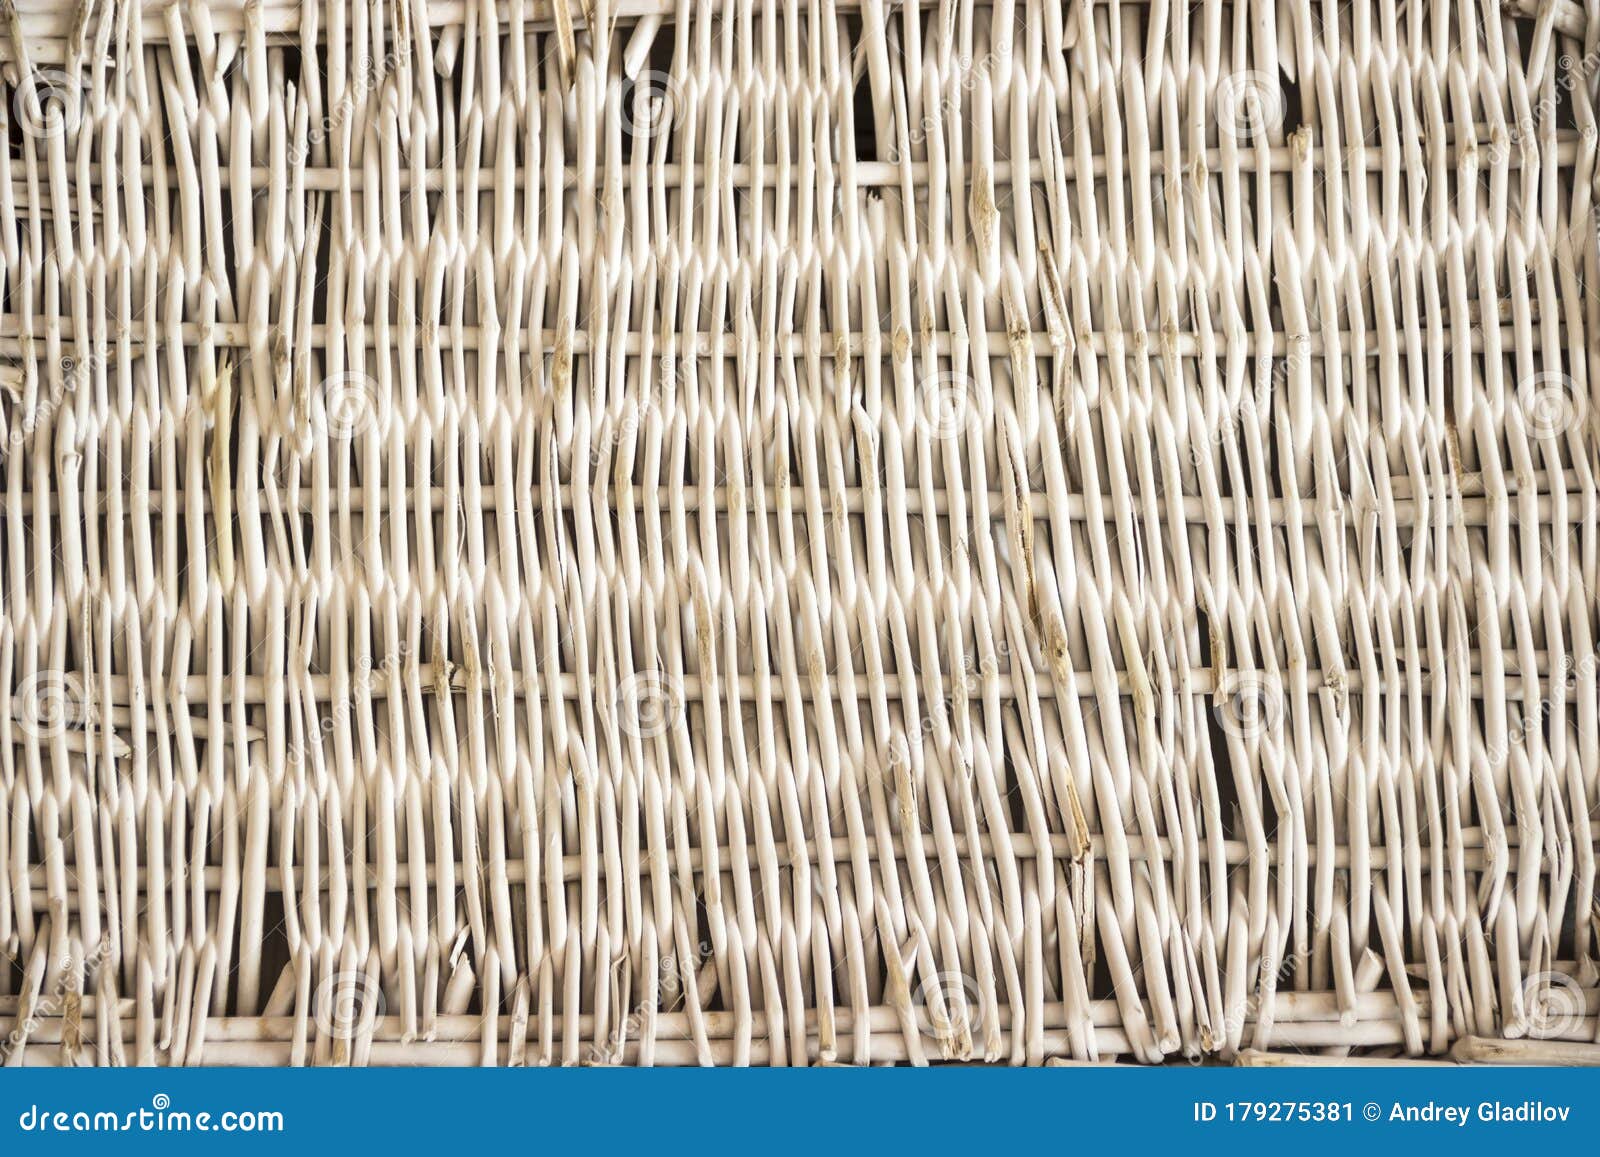 Omleiden Lach pin Wicker Material Made of Twigs Stock Image - Image of texture, woven:  179275381